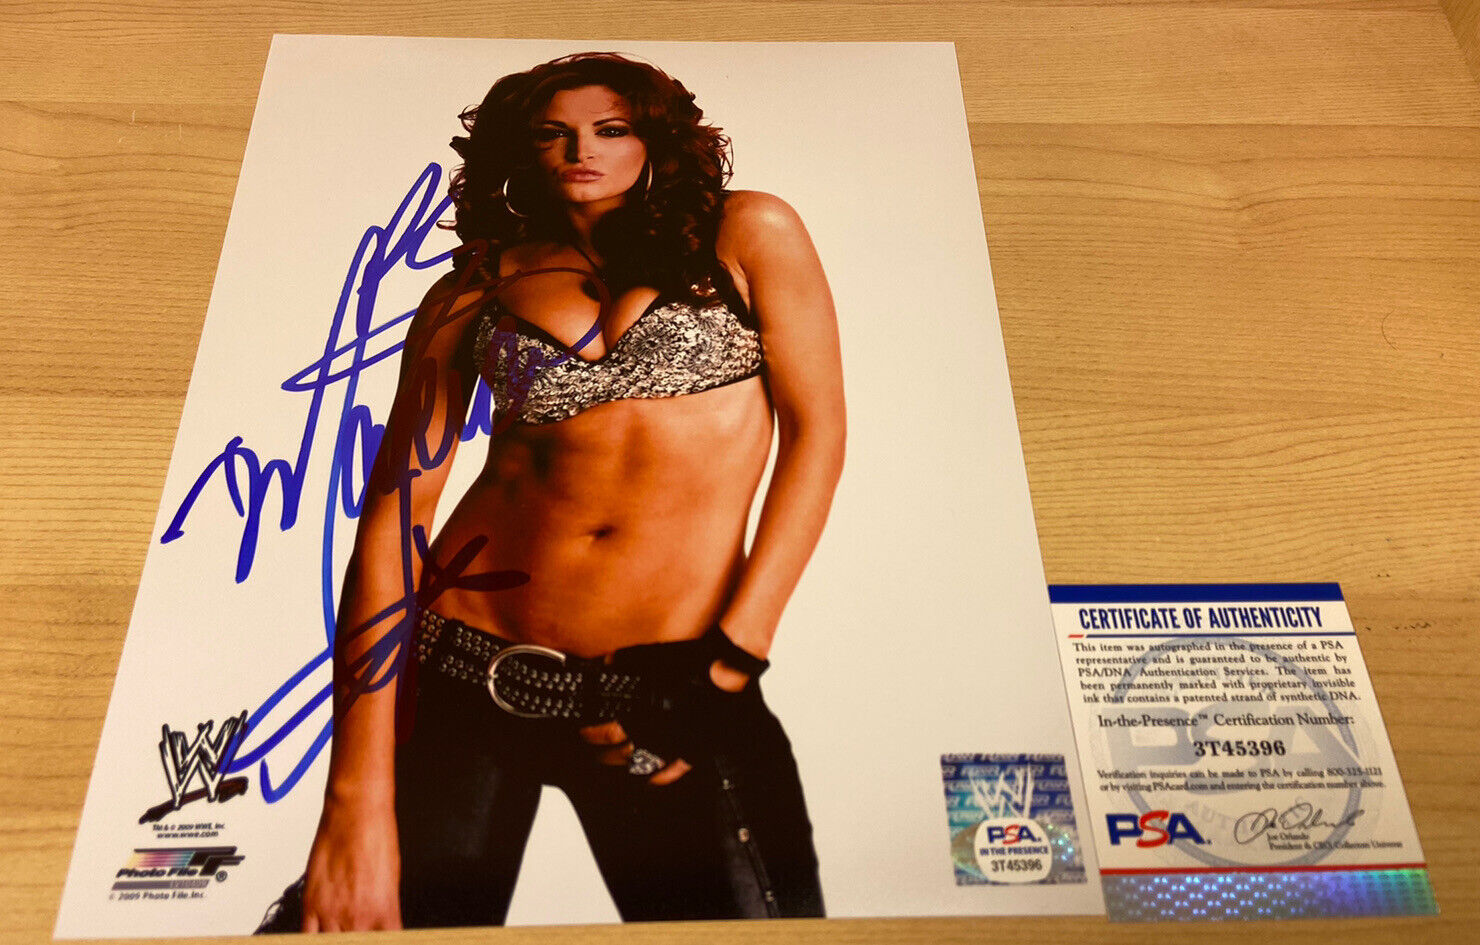 Maria Kanellis WWE ROH Autographed Signed 8X10 Photo Poster painting PSA/DNA Witnessed COA